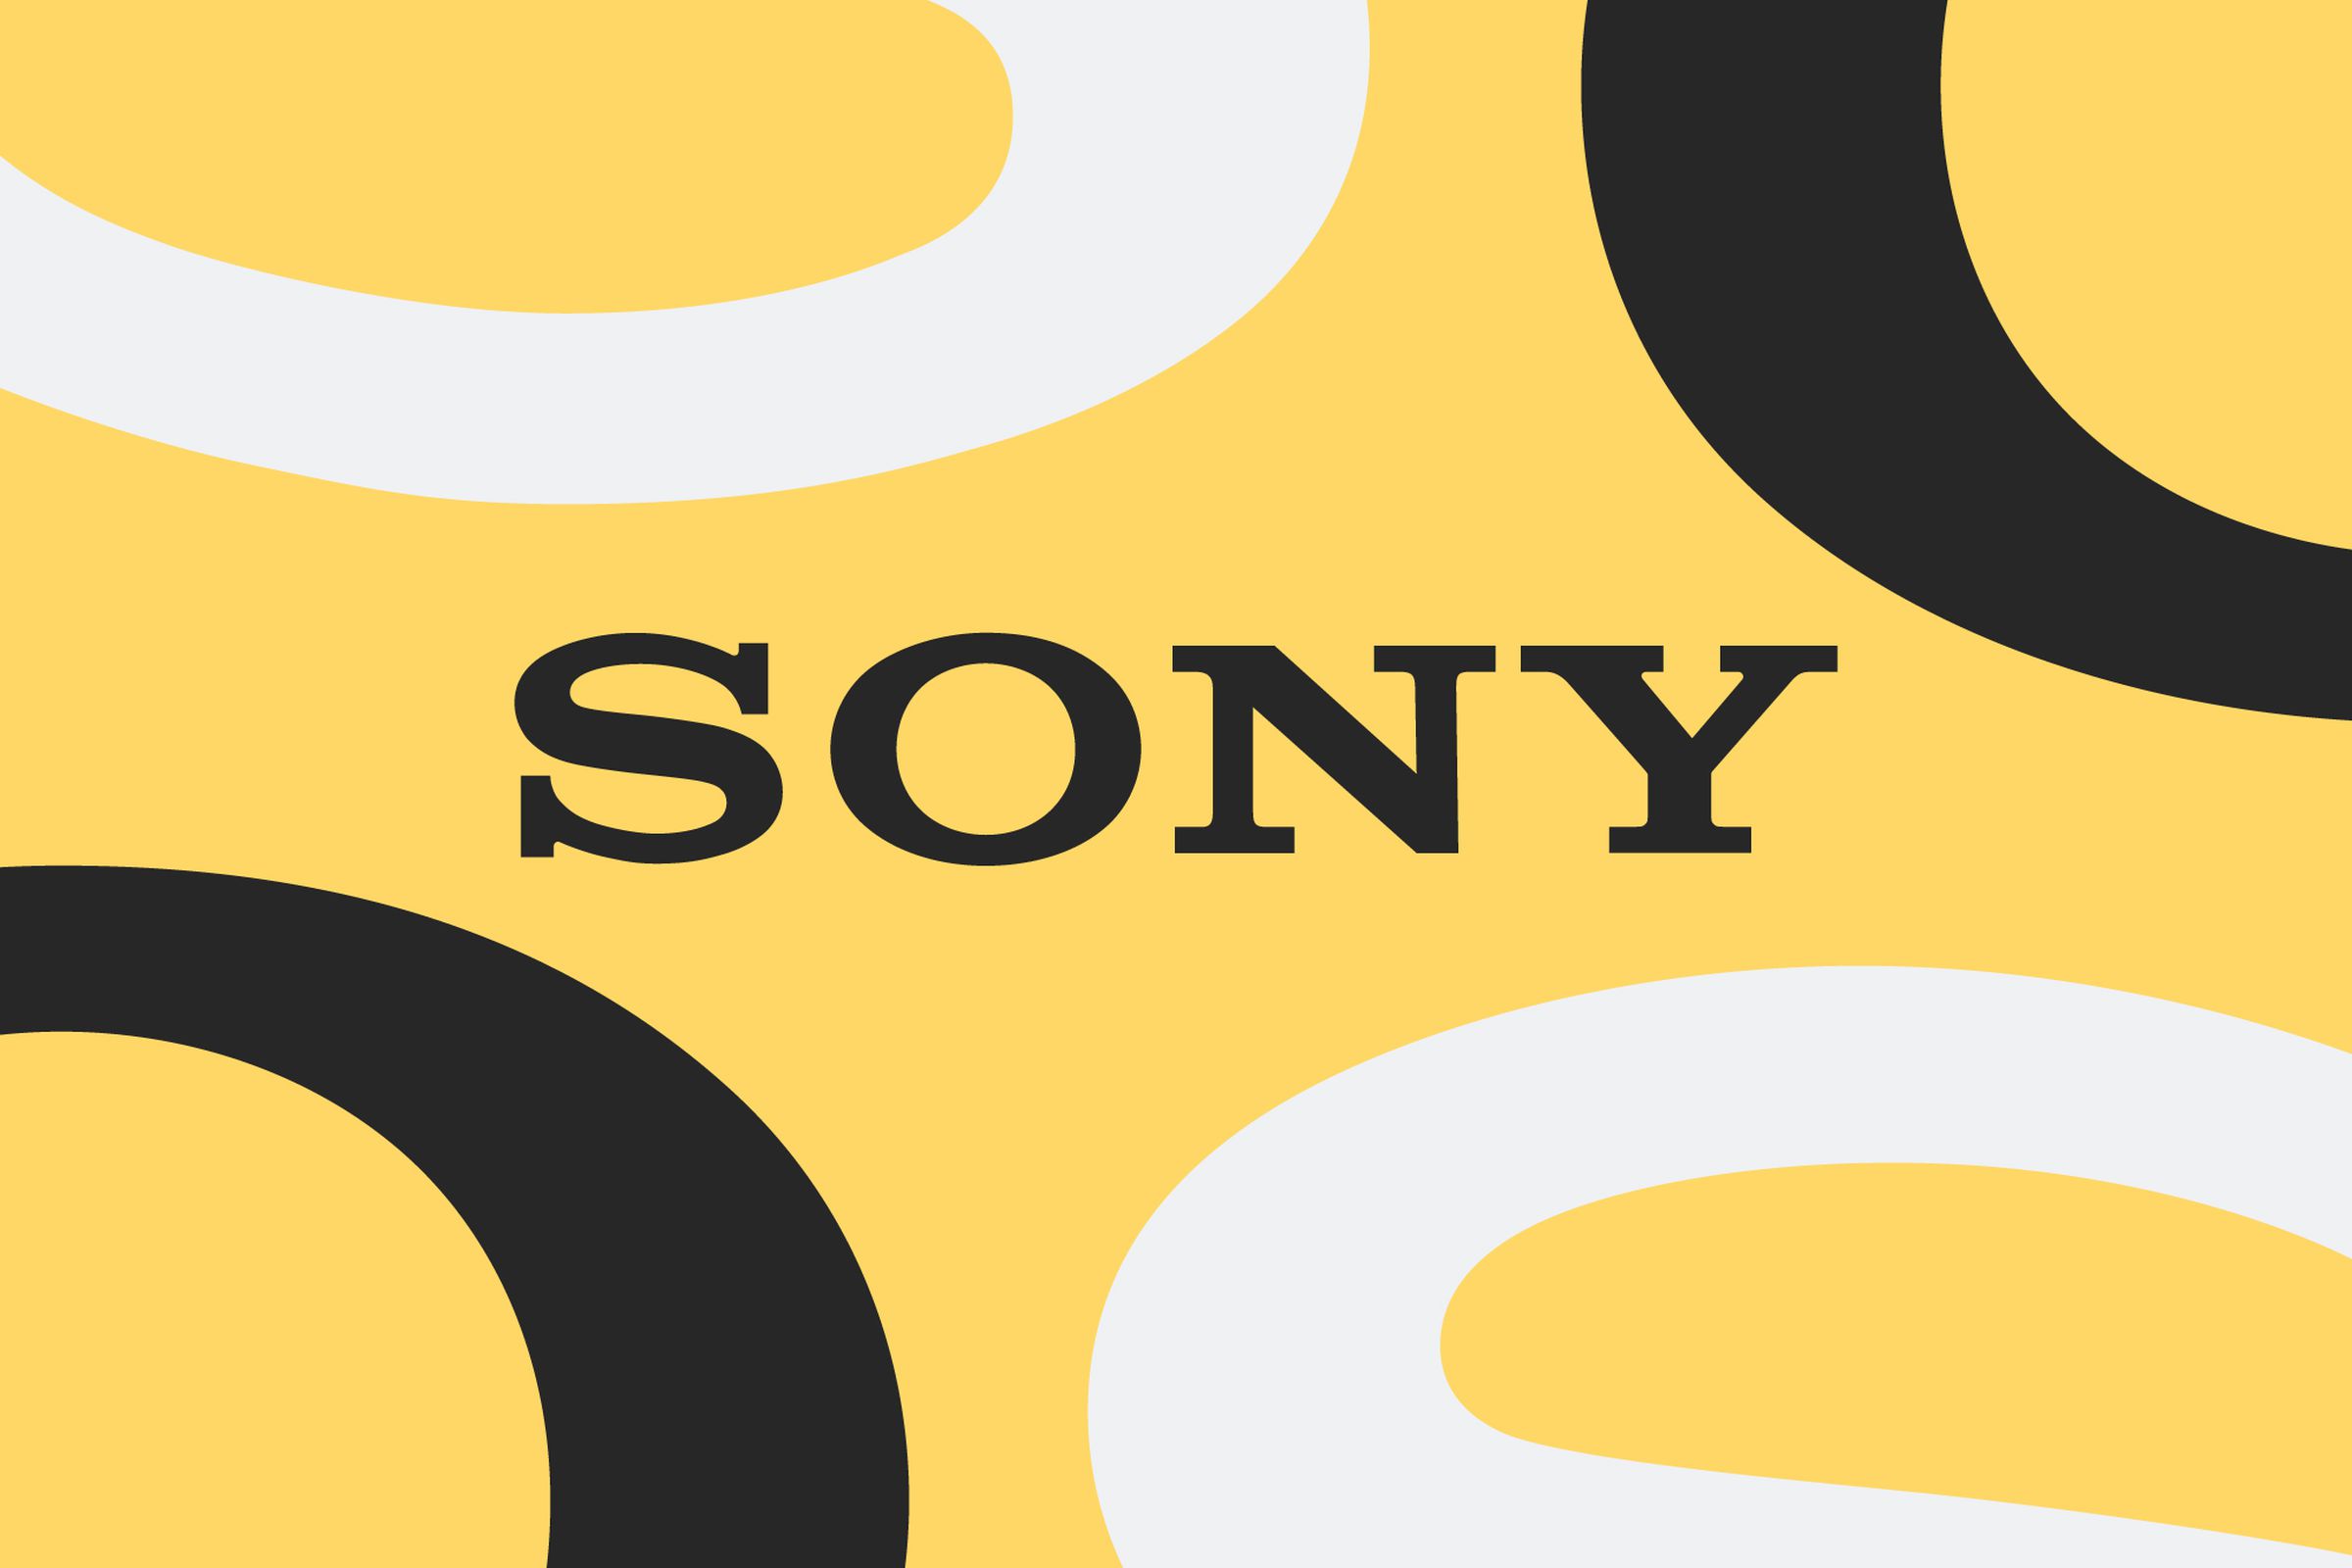 An illustration featuring the Sony logo.